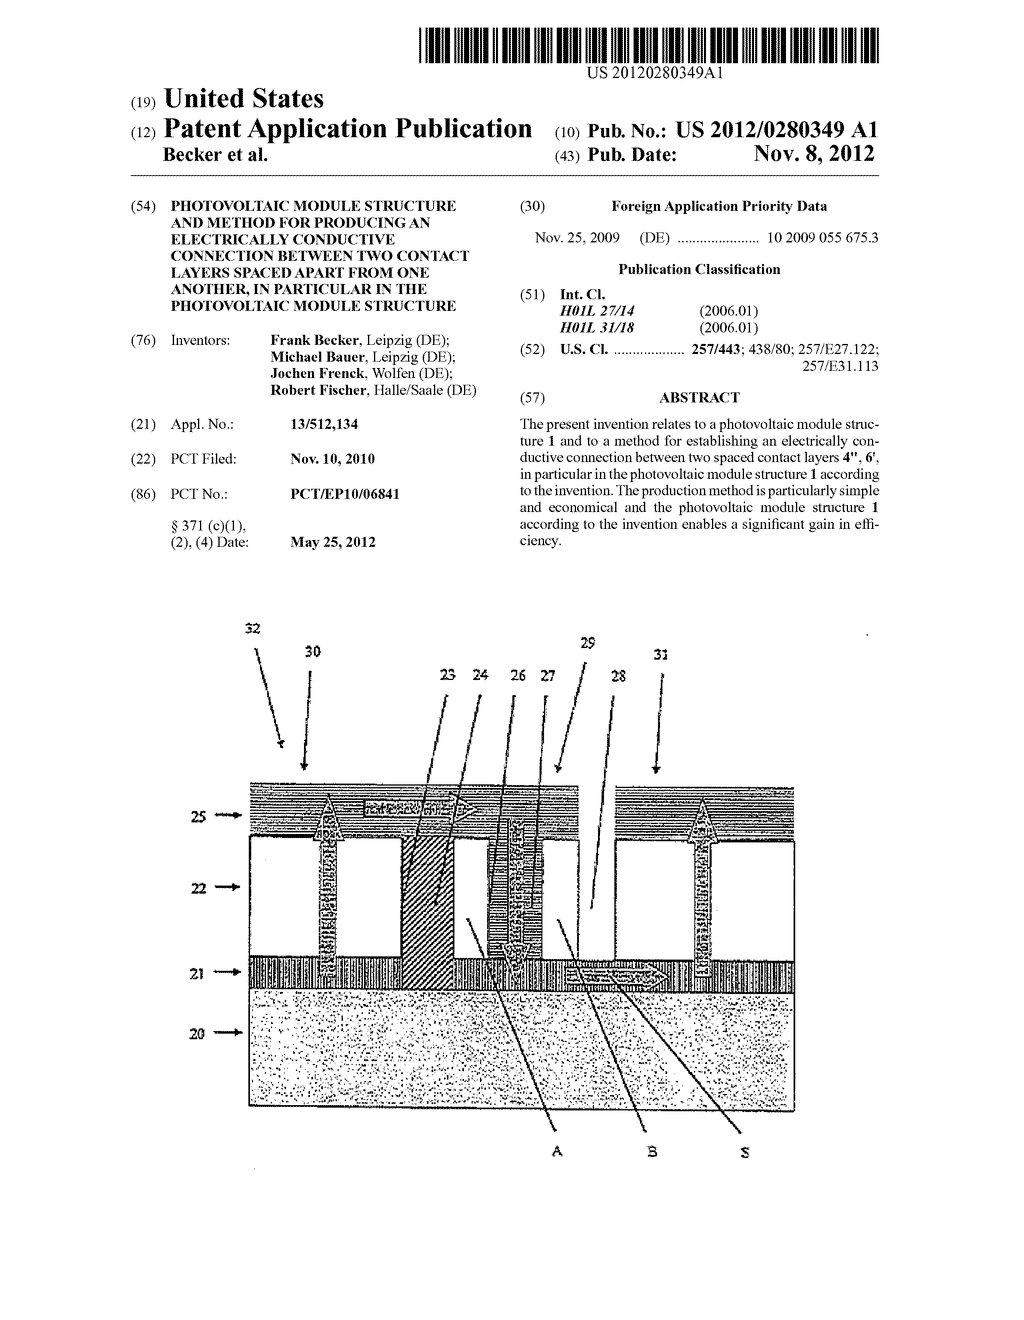 PHOTOVOLTAIC MODULE STRUCTURE AND METHOD FOR PRODUCING AN ELECTRICALLY     CONDUCTIVE CONNECTION BETWEEN TWO CONTACT LAYERS SPACED APART FROM ONE     ANOTHER, IN PARTICULAR IN THE PHOTOVOLTAIC MODULE STRUCTURE - diagram, schematic, and image 01